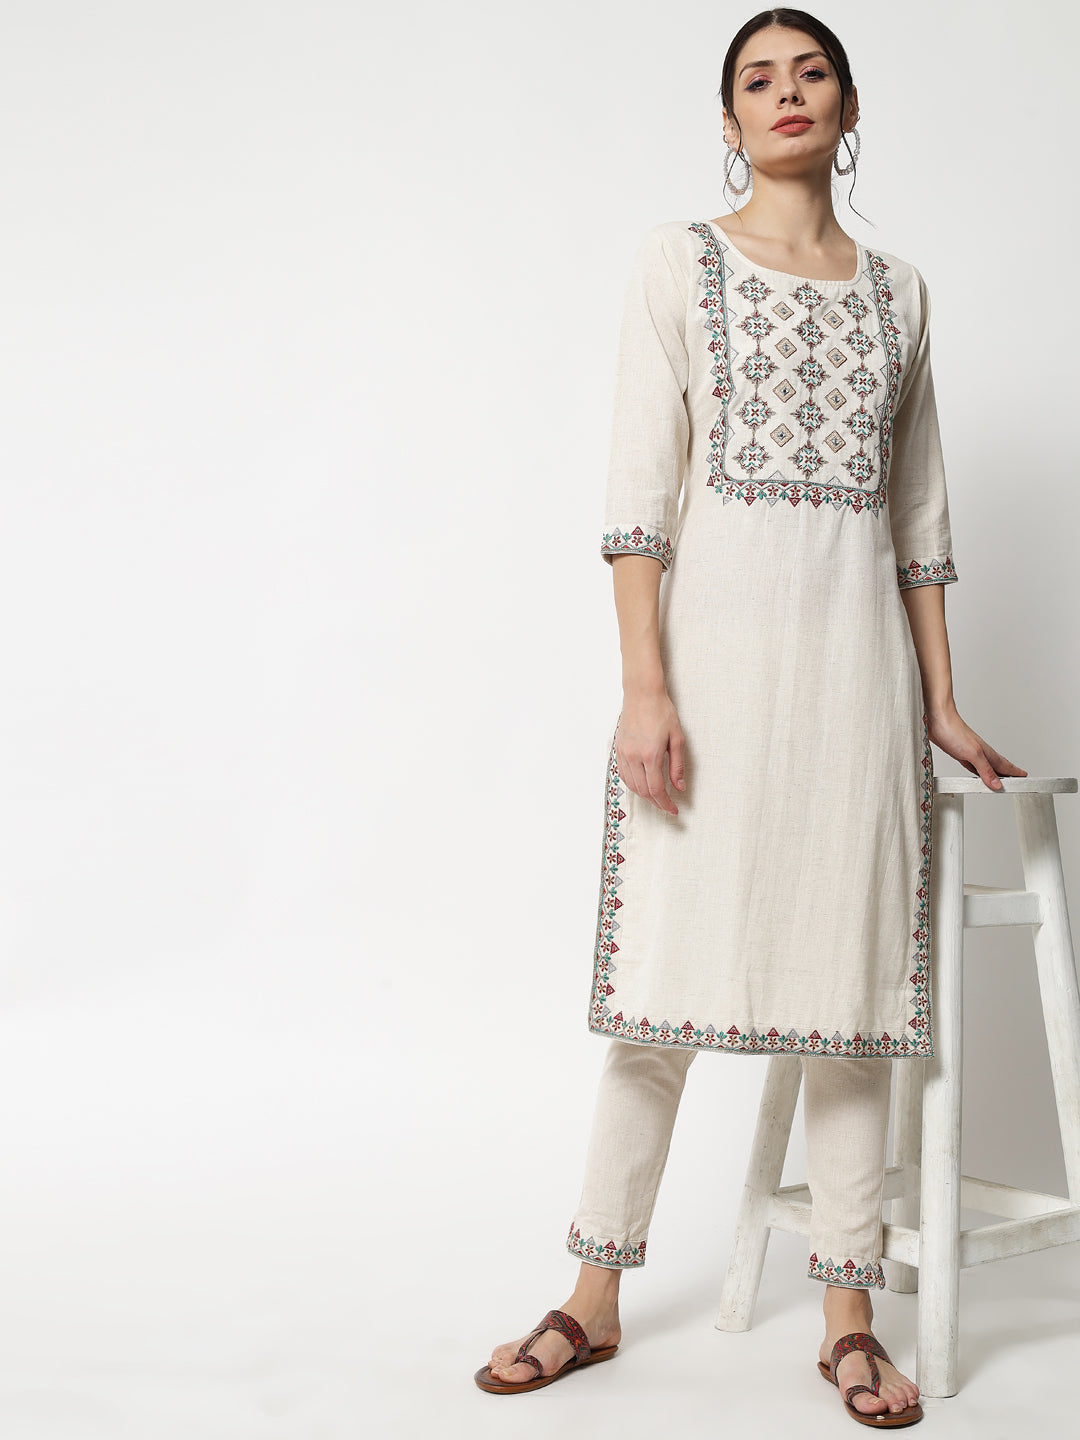 Women's Off-White & Maroon Embroidered Kurta With Trousers - Meeranshi